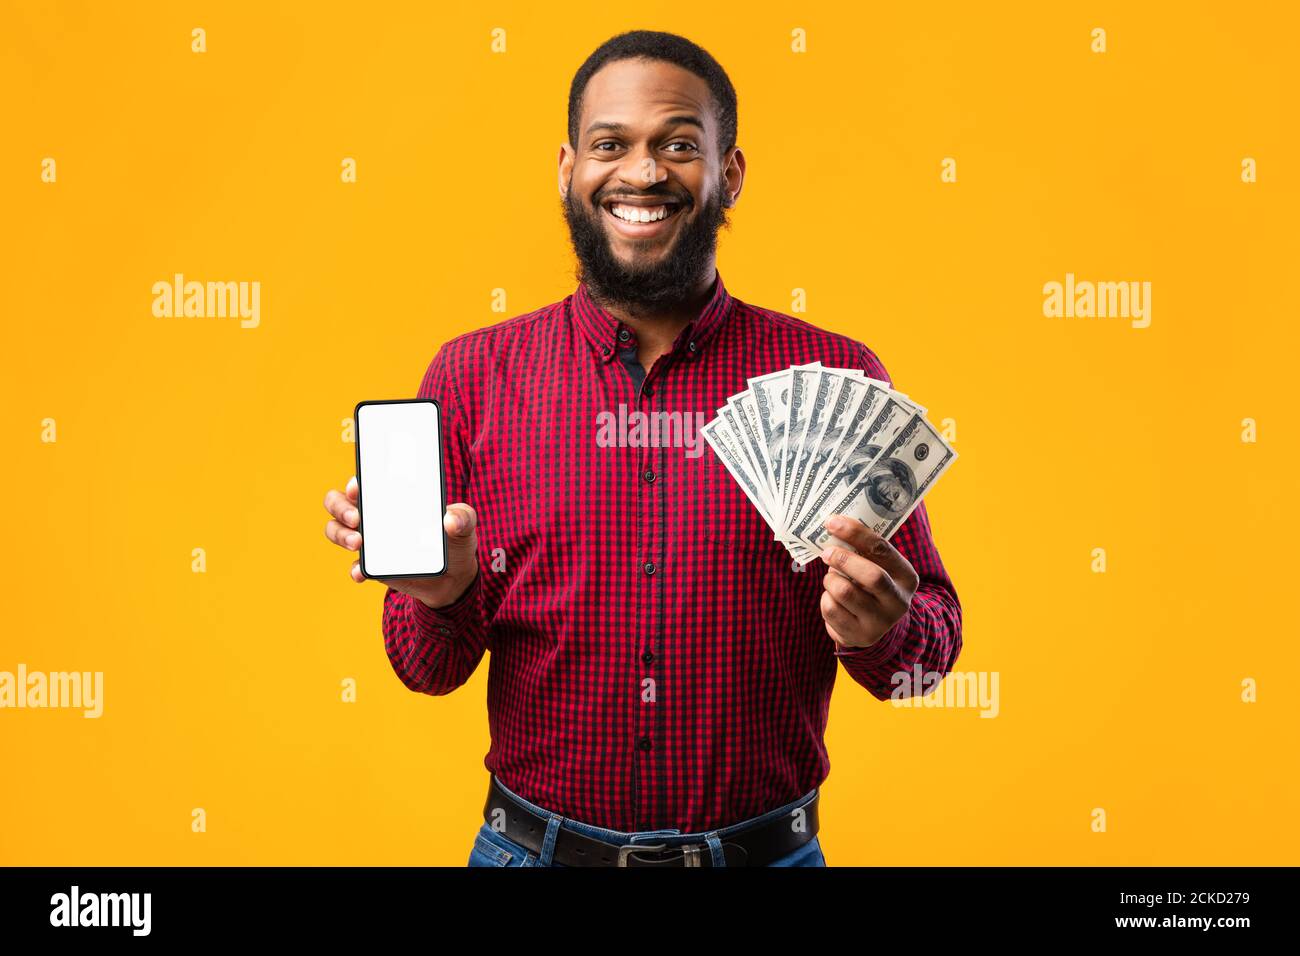 Afro guy holding mobile phone and bunch of money cash Stock Photo - Alamy